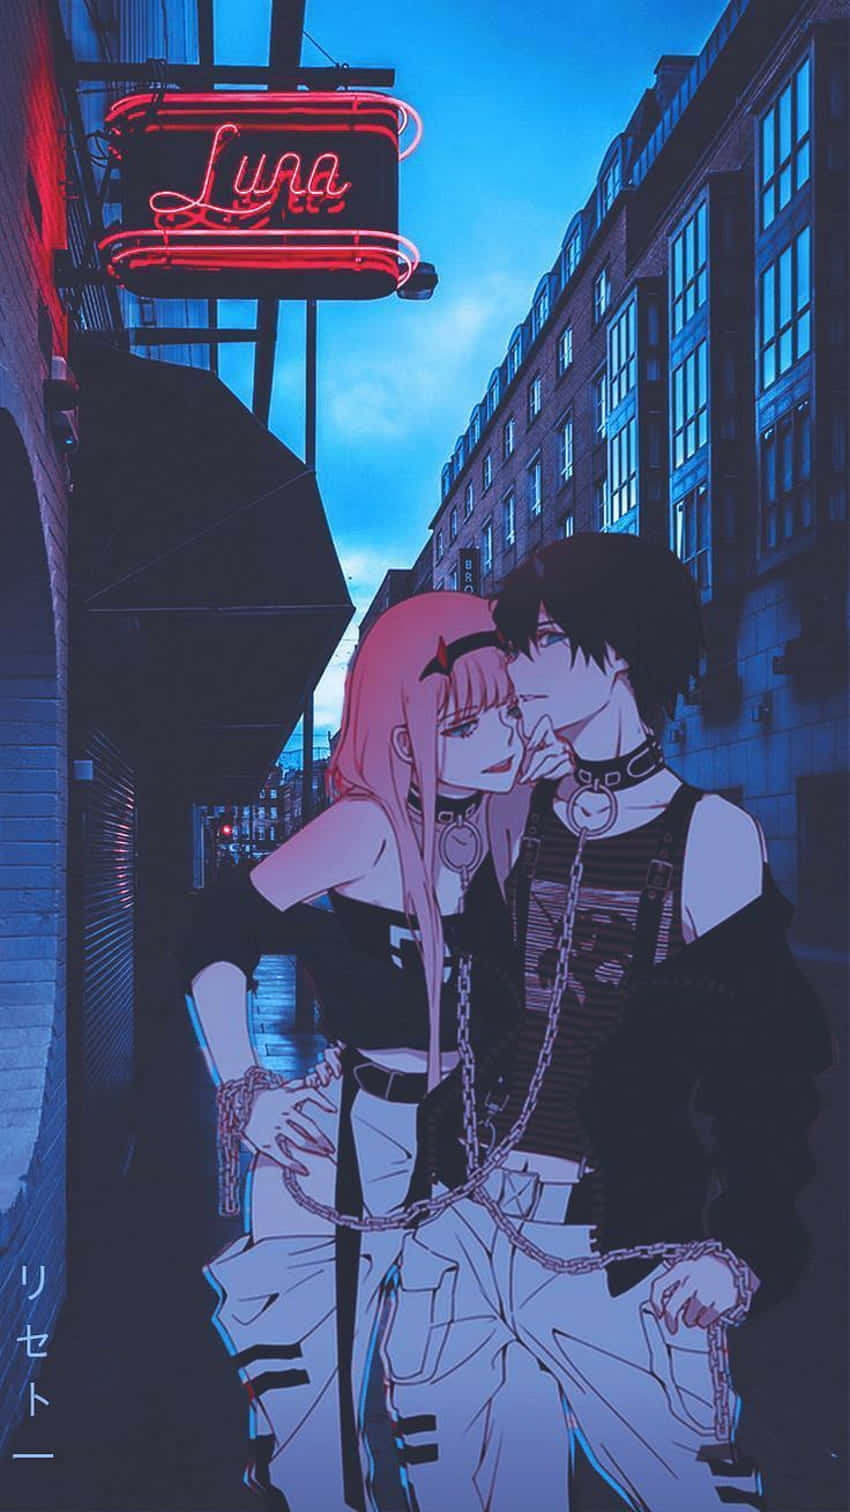 Two Anime Characters in an Intimate Aesthetic Moment Wallpaper